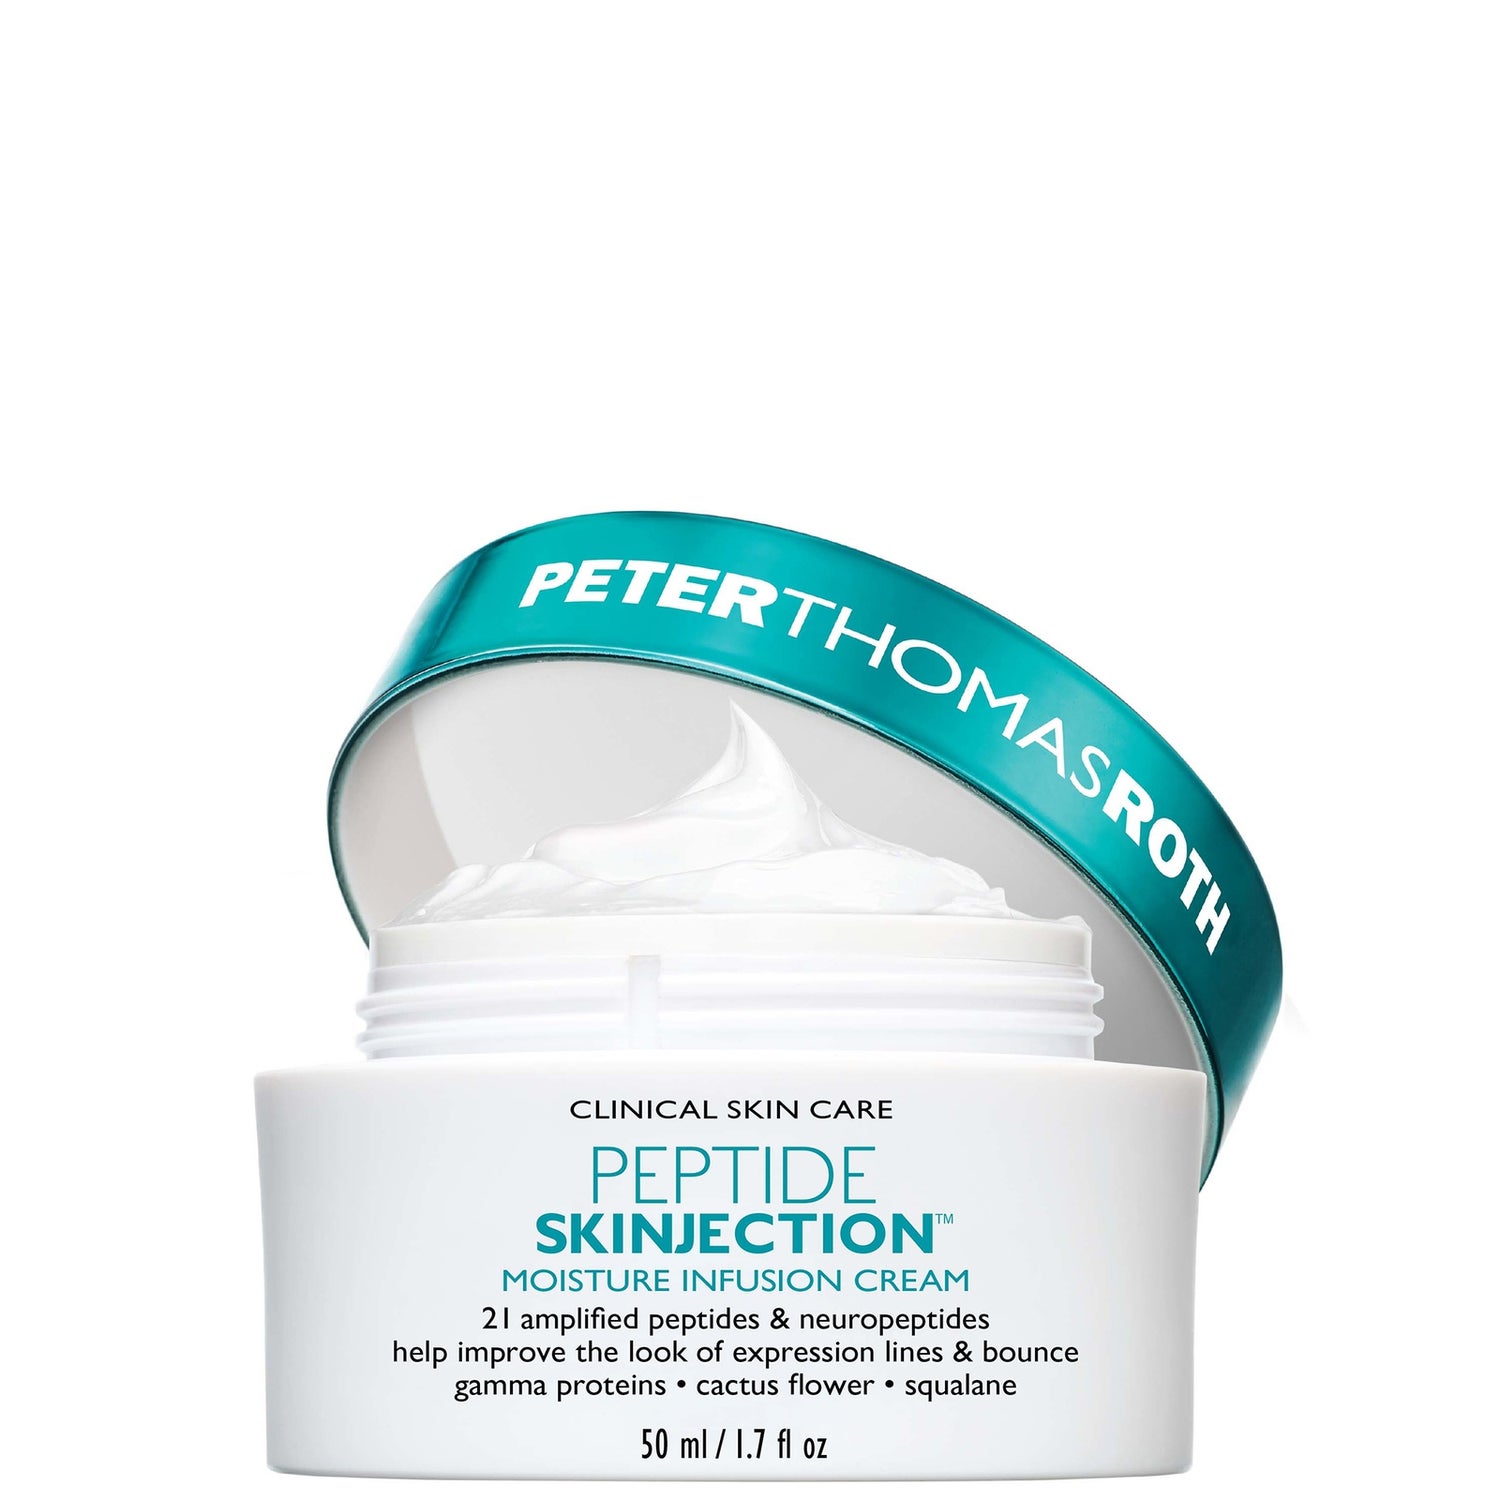 Peter Thomas Roth Peptide Skinjection Moisture Infusion Refillable Cream 50ml